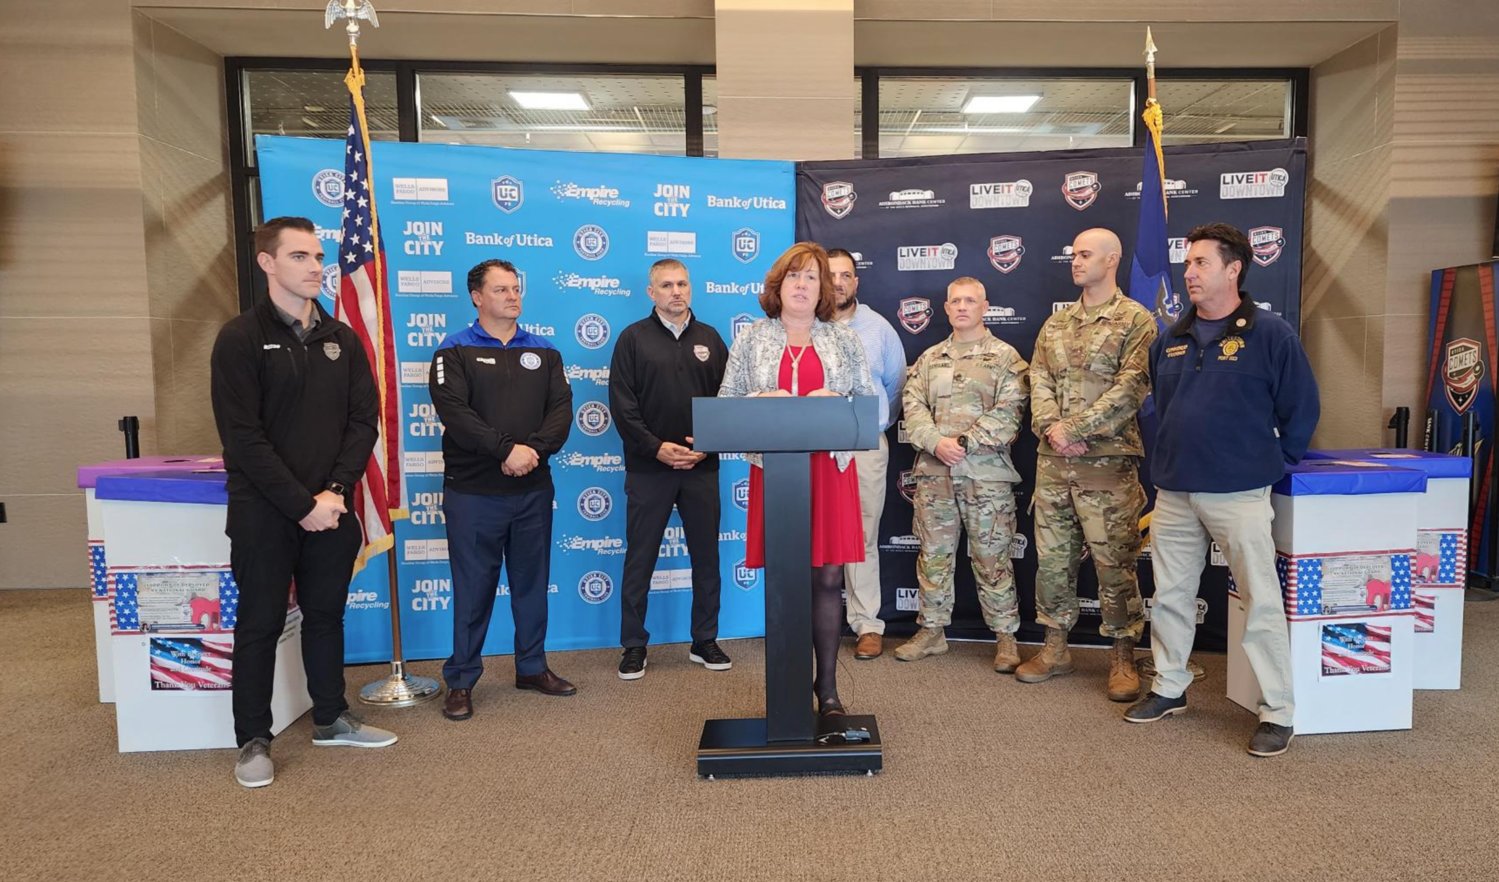 Assemblywoman Marianne Buttenschon, D-119, Marcy, along with several partnering organizations outlines an effort to assist members of the New York National Guard who will be stationed overseas during the holiday season during a press conference on Thursday.